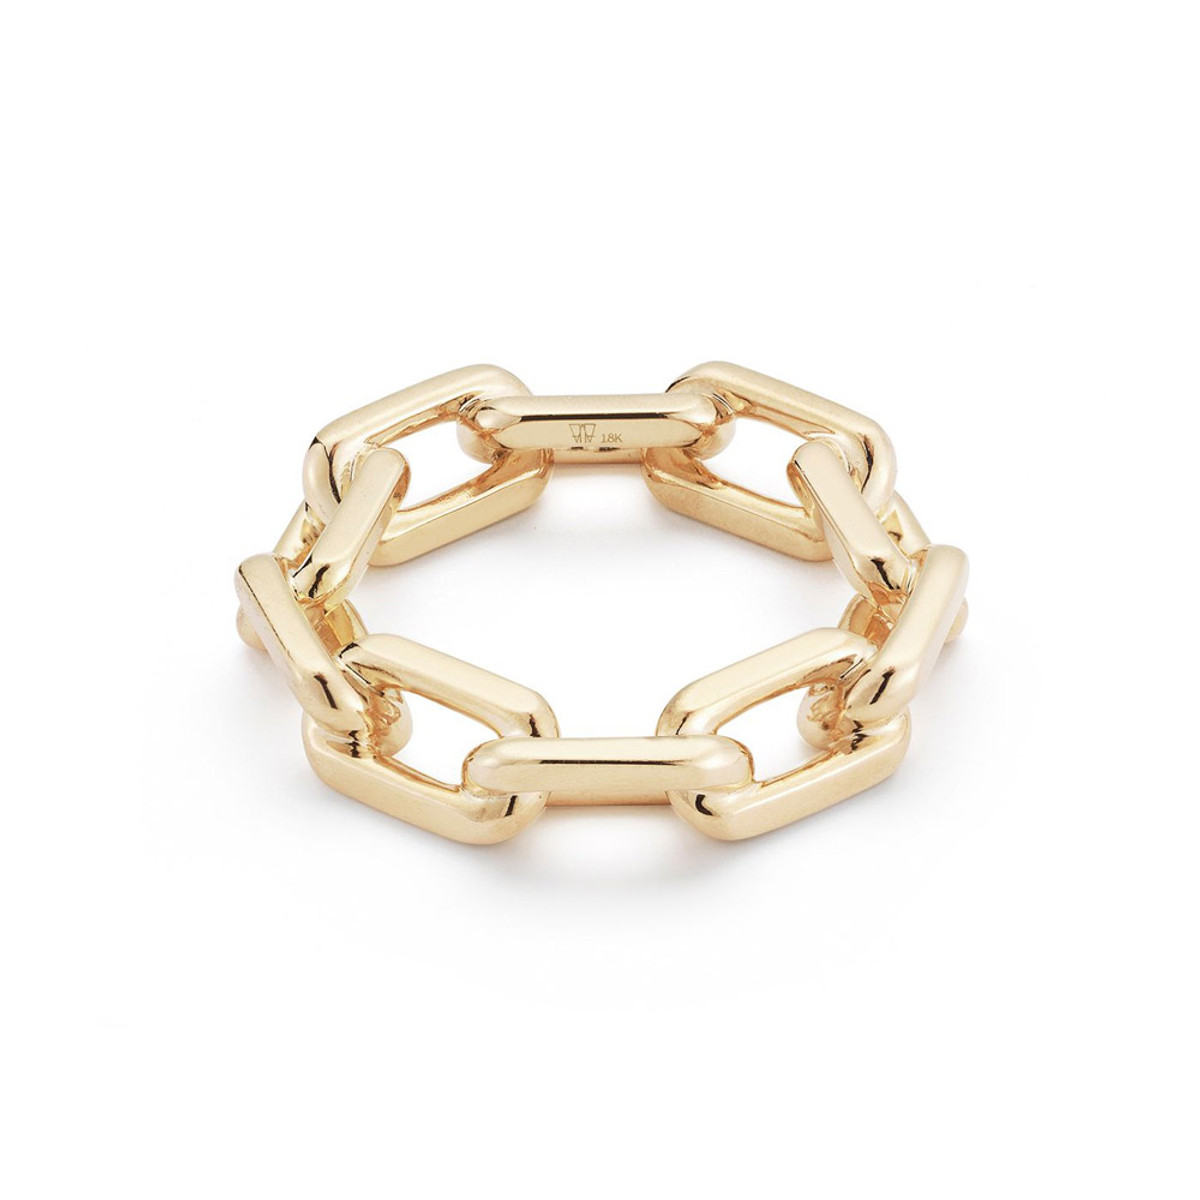 Walters Faith Saxon 18K Yellow Gold Large Chain Link Ring, Size 7-56171 Product Image